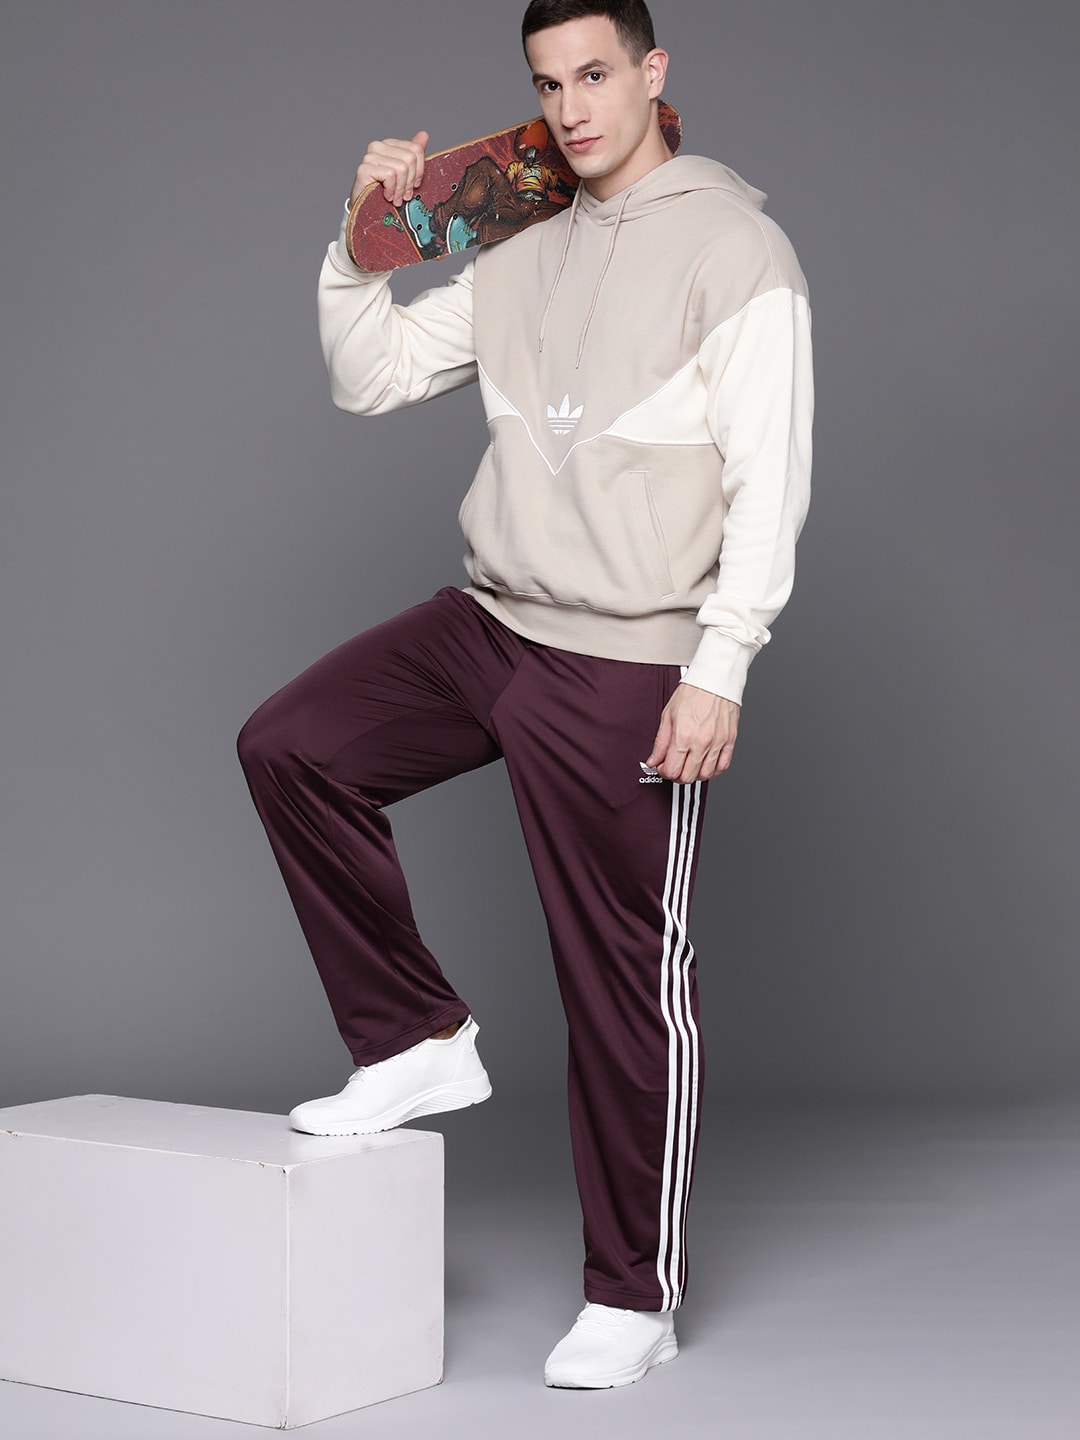 Firebird Track Pants with Contrast Stripes